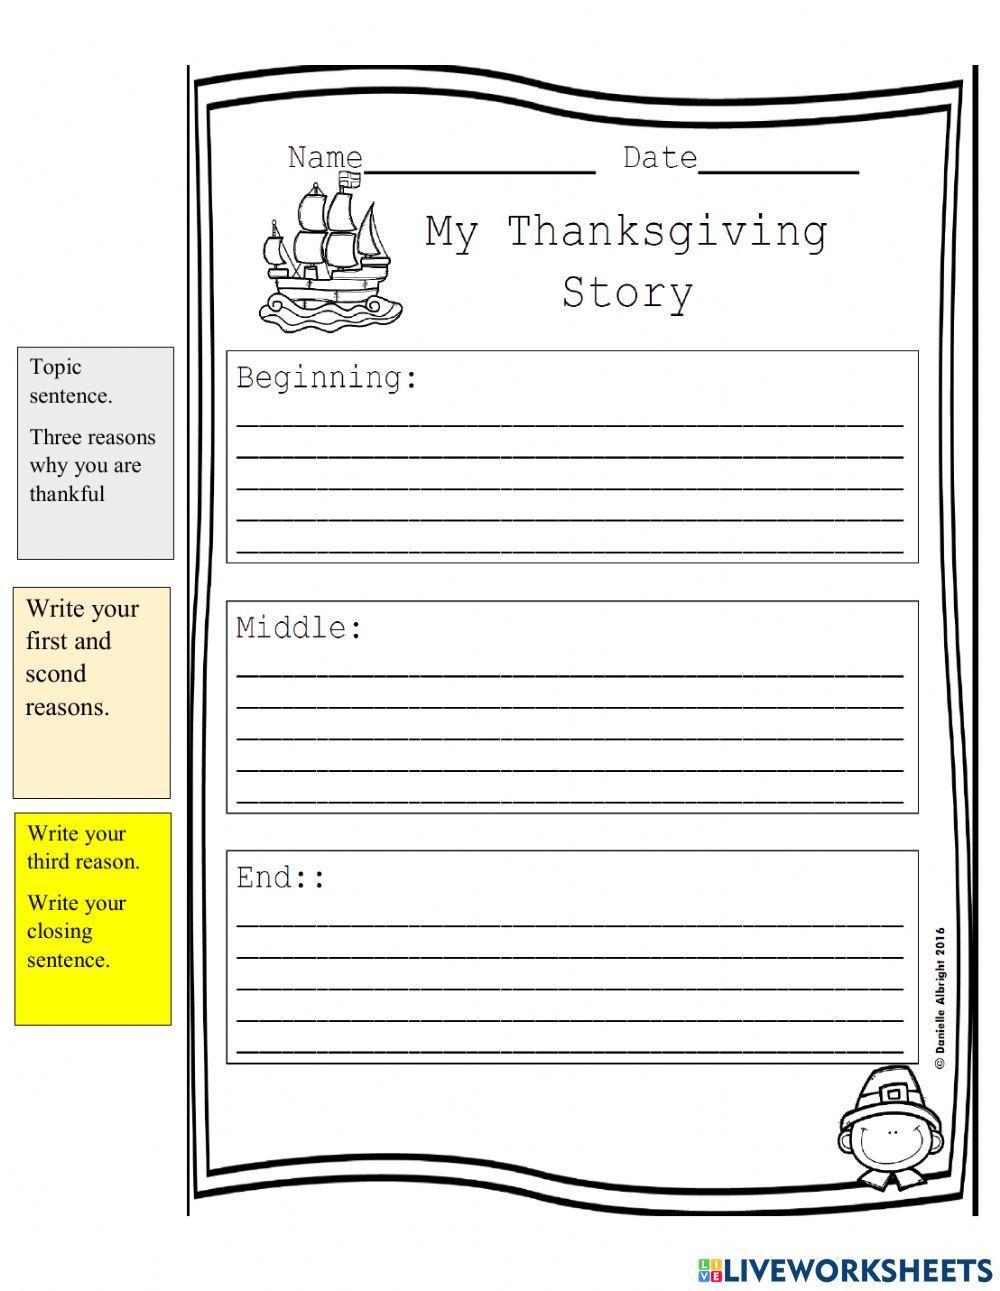 My Thanksgiving story - Creative Writing